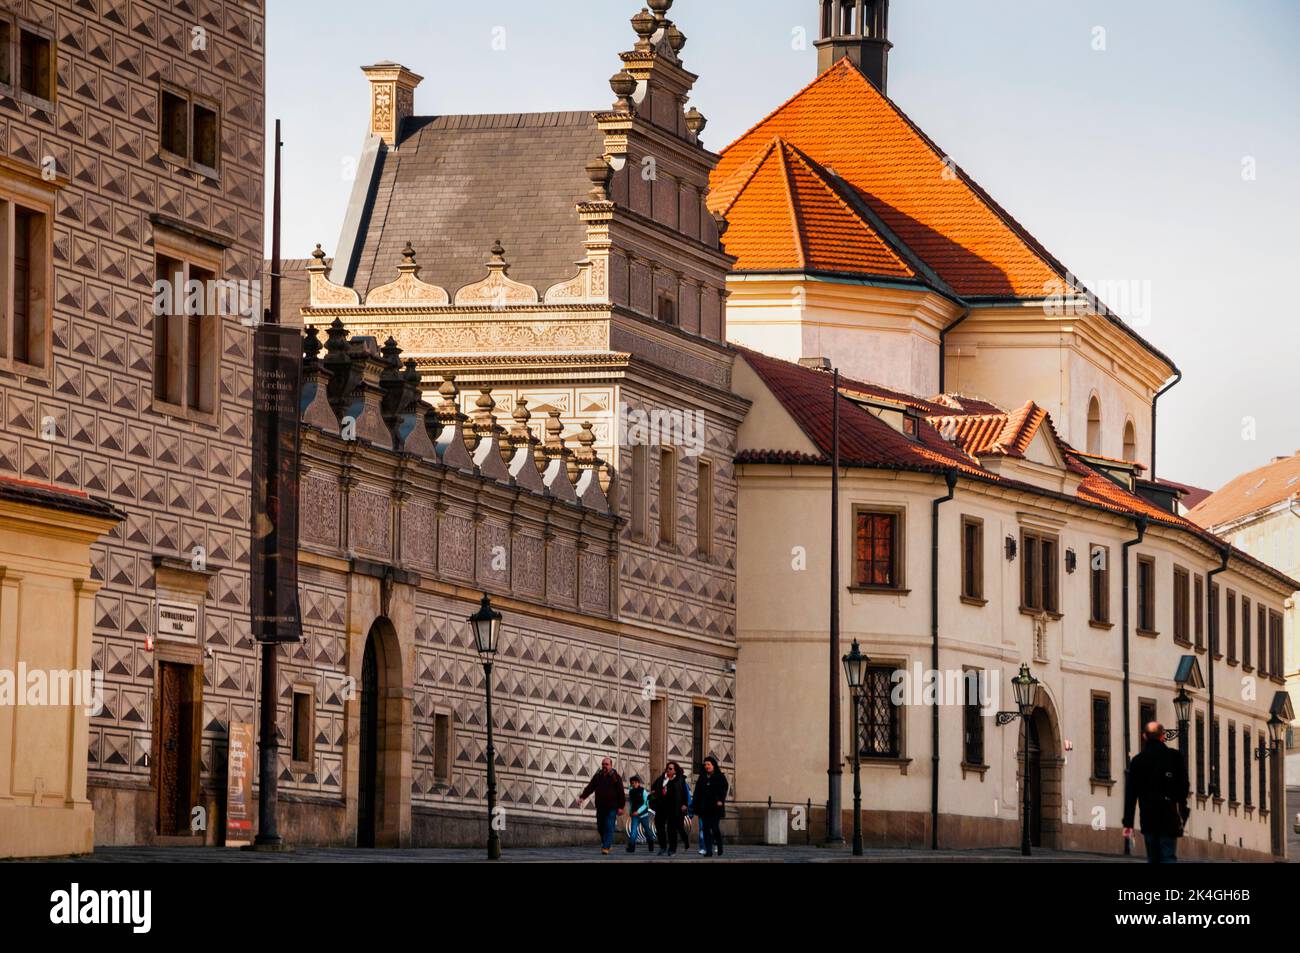 Early Renaissance Schwarzenberg Palace decorated with sgraffito, now the National Gallery in Prague, Czech Republic. Stock Photo